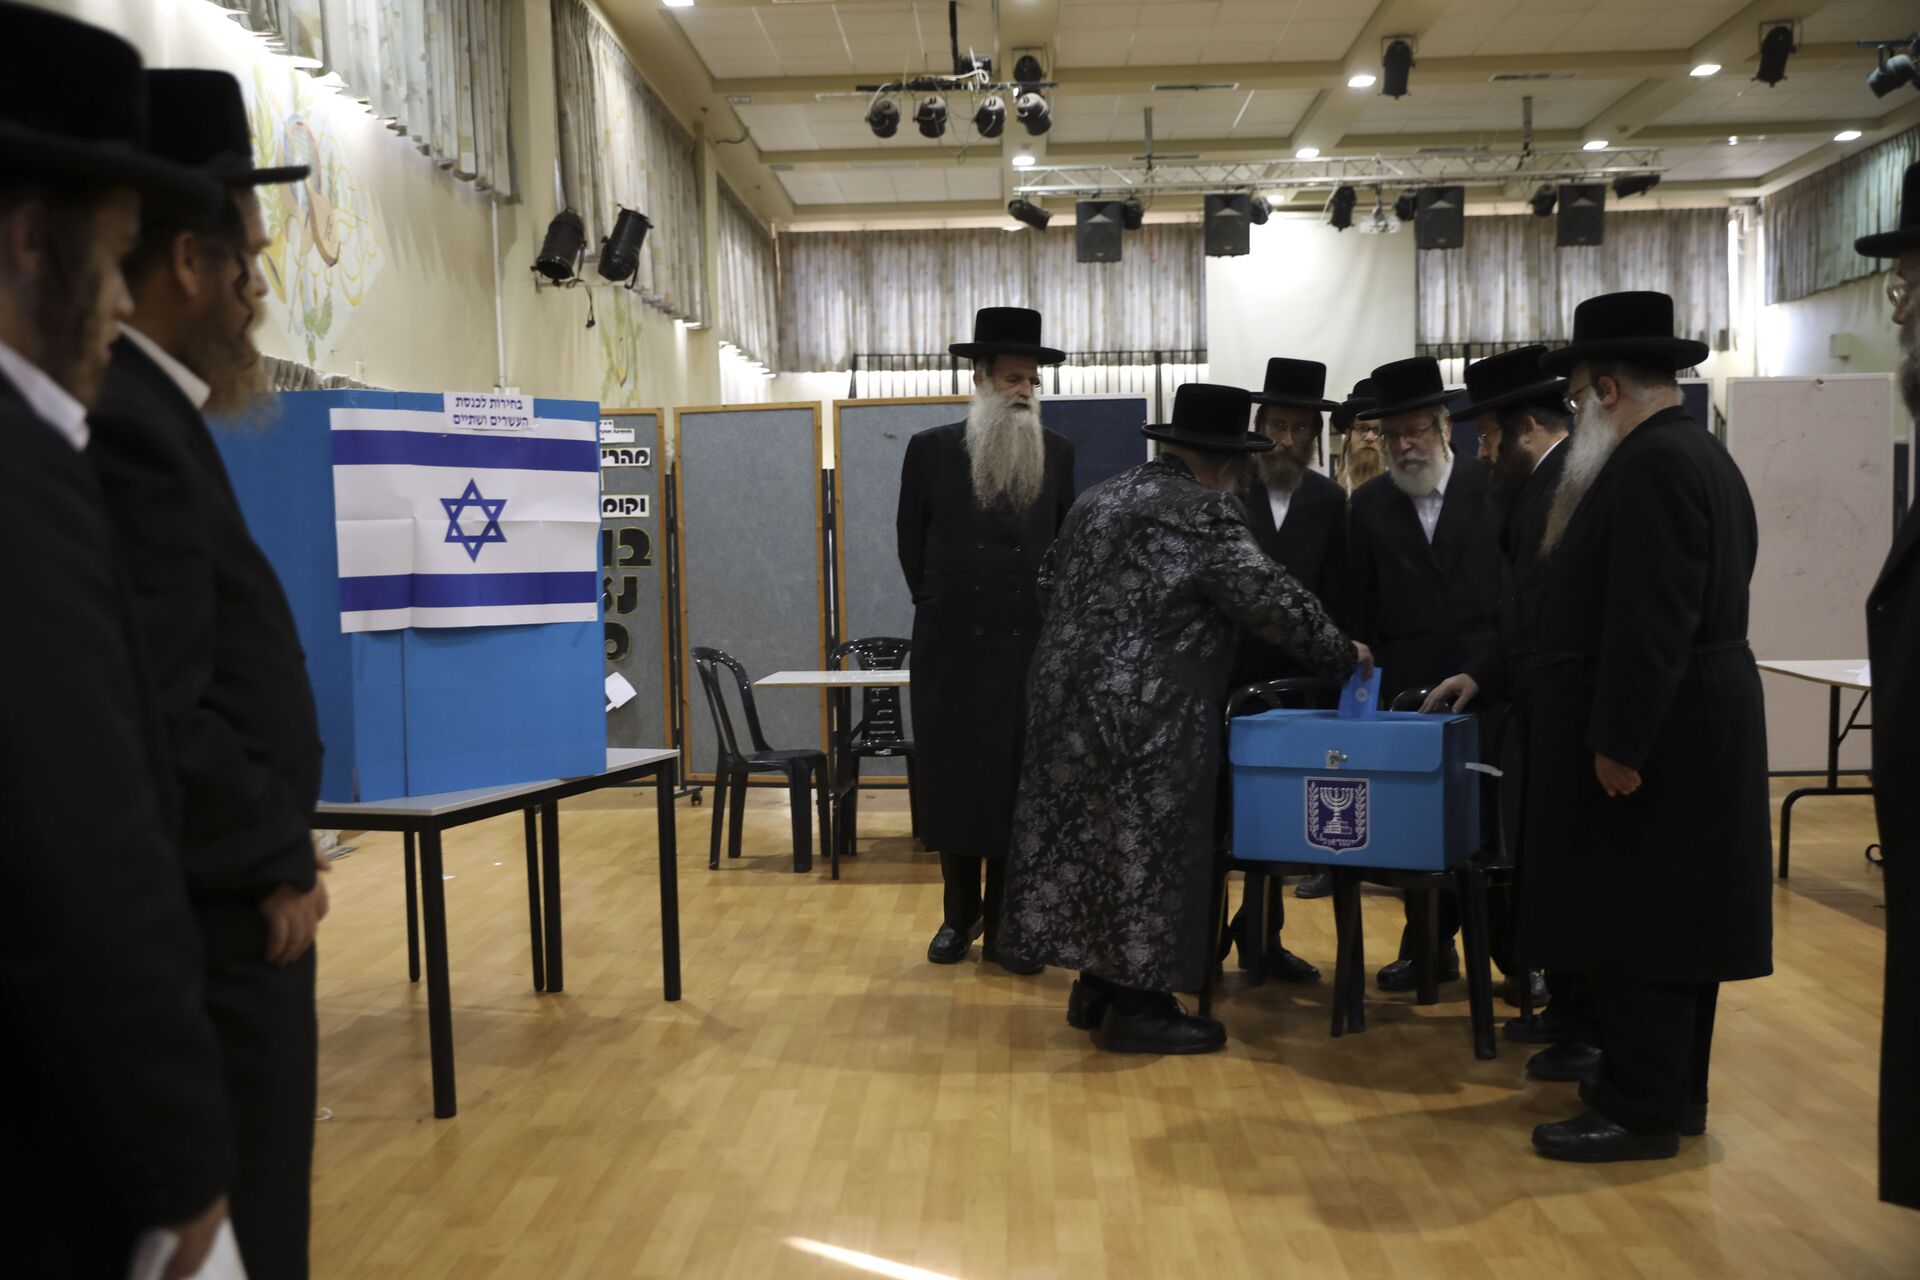 FILE - In this Tuesday, Sept. 17, 2019 file photo, ultra-Orthodox Jews watch Rabbi Israel Hager vote in Bnei Brak, Israel. Prime Minister Benjamin Netanyahu has called on his rival, Benny Gantz, to join a unity government, after unprecedented repeat elections returned a near tie between the two main parties. - Sputnik International, 1920, 22.06.2022